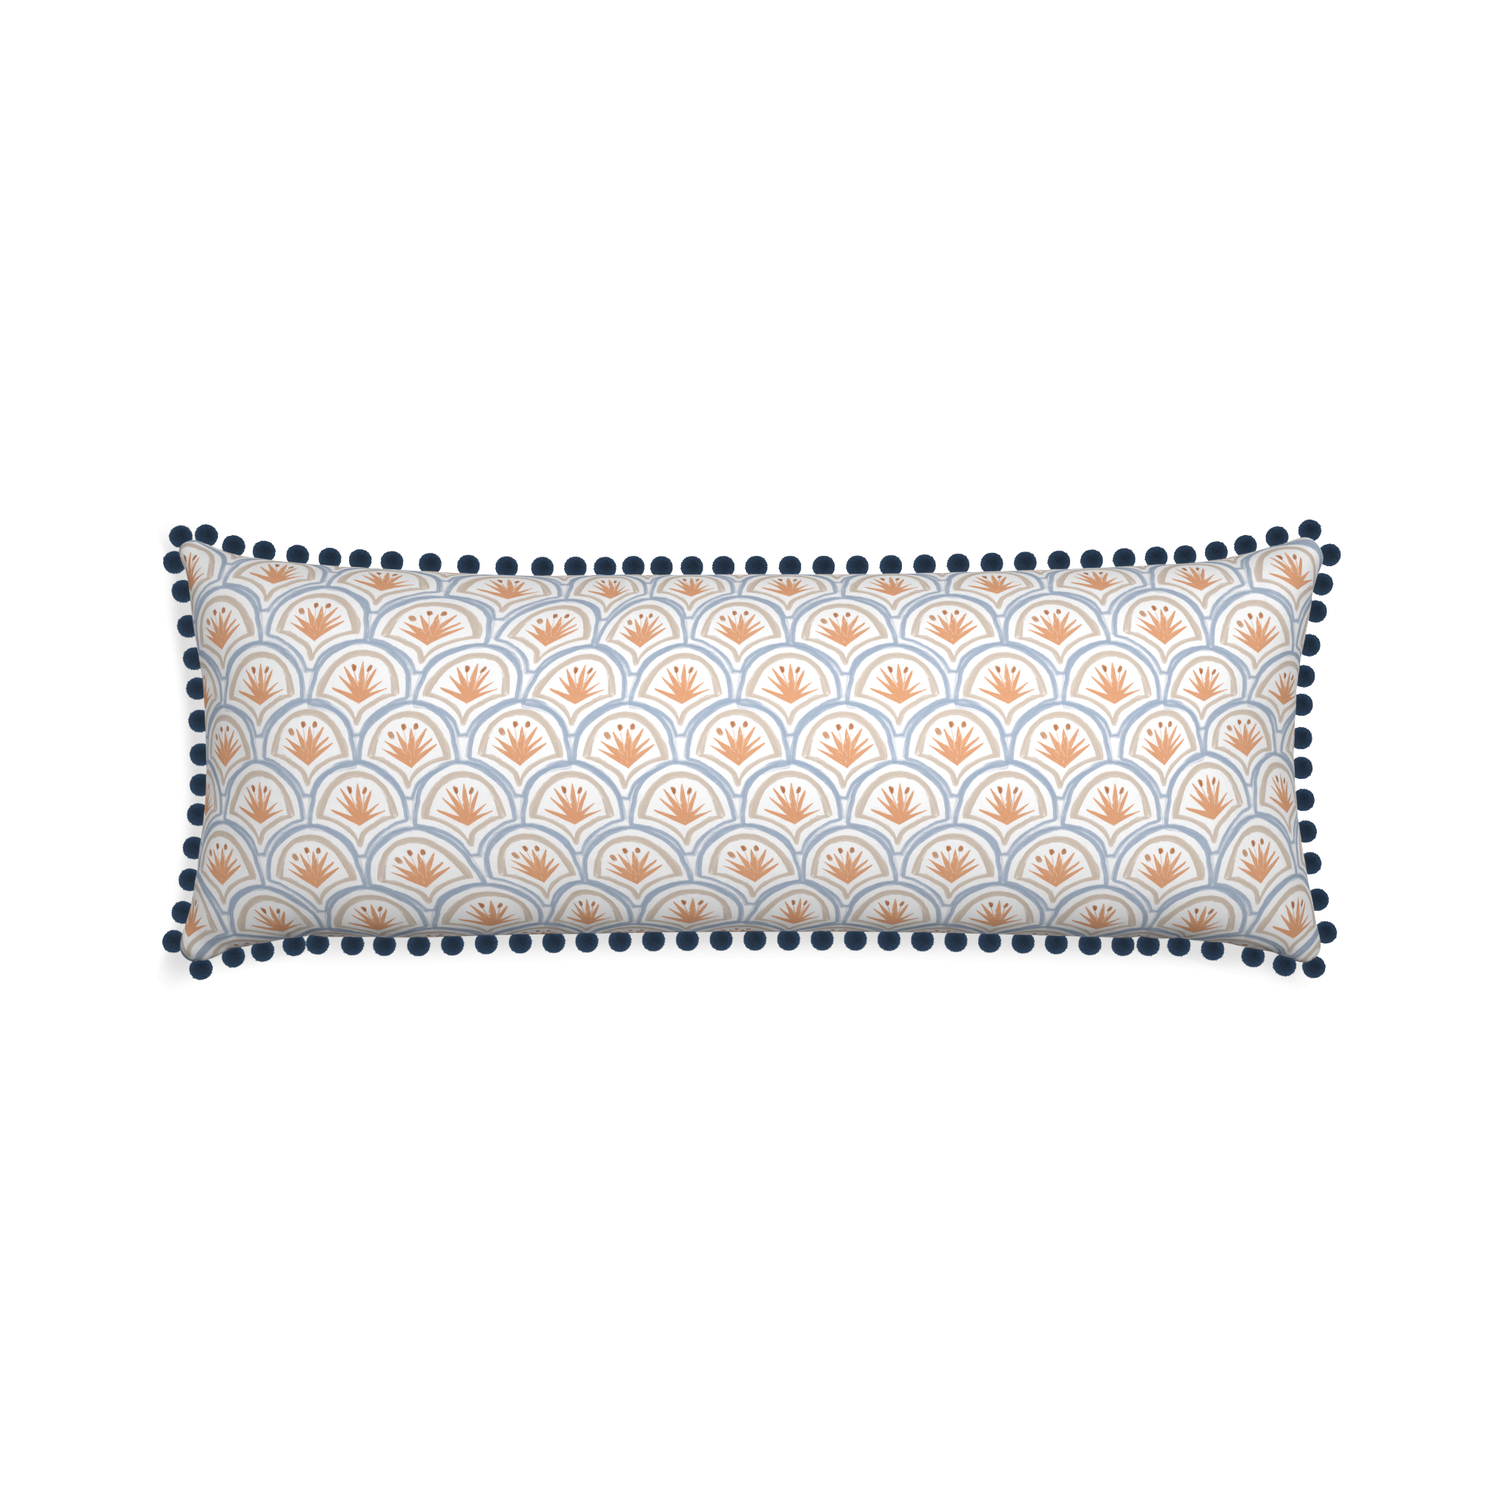 Xl-lumbar thatcher apricot custom art deco palm patternpillow with c on white background